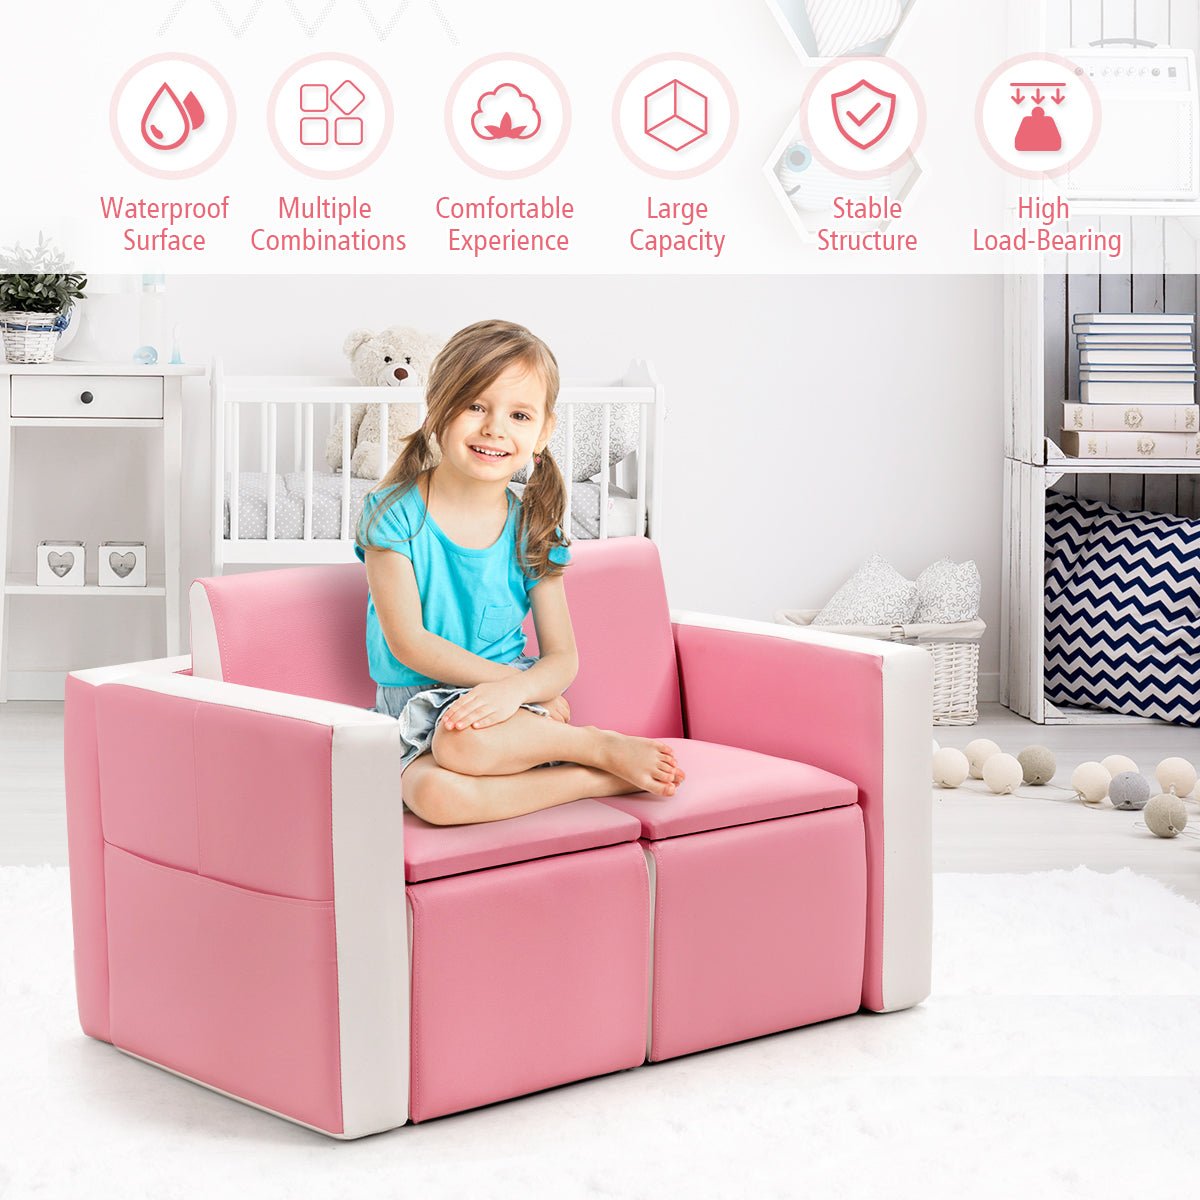 Children's Pink Sofa with Built-In Storage - Relax, Play, Organize